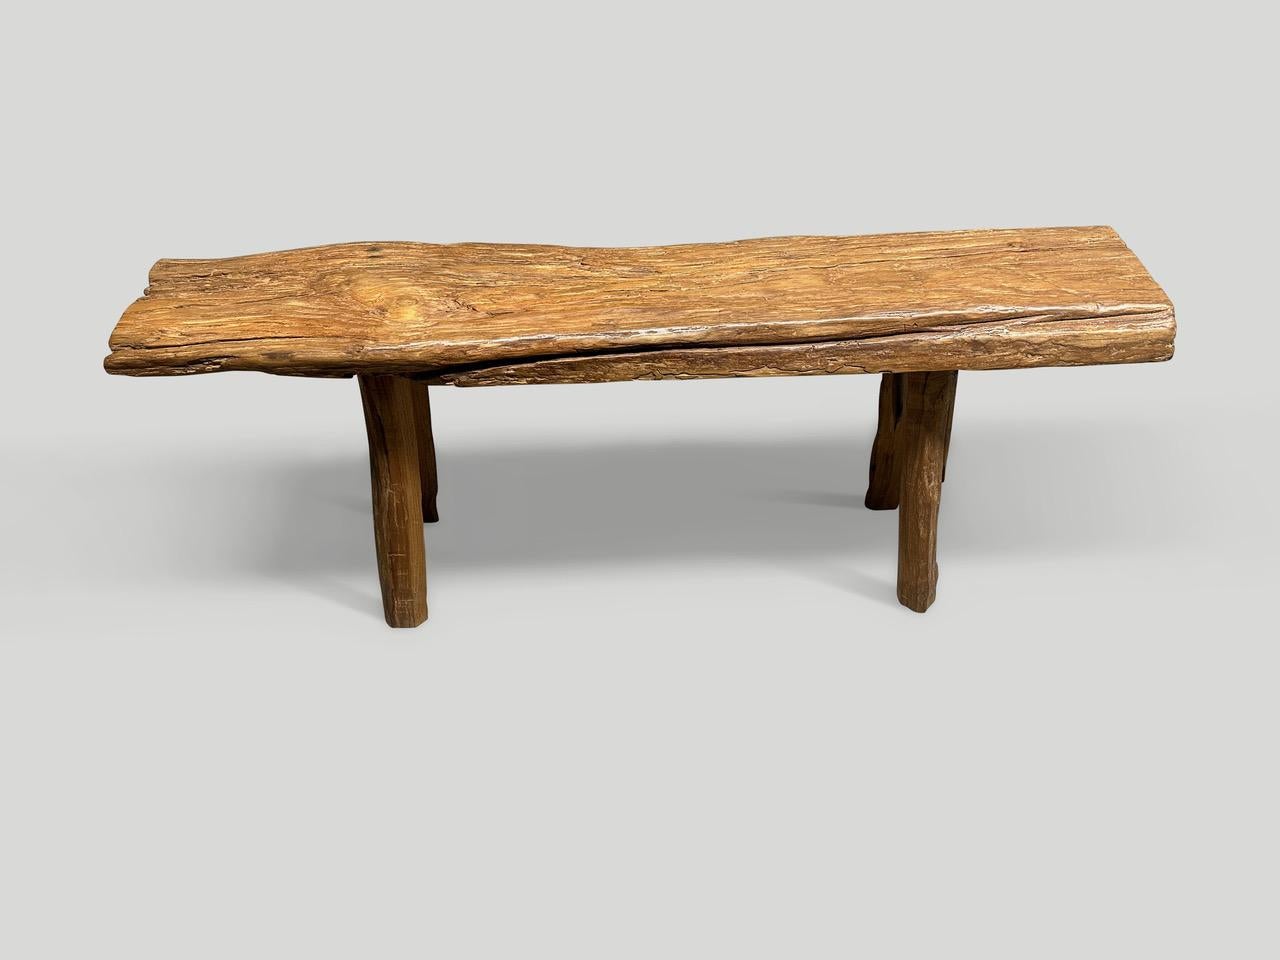 Antique bench with beautiful character hand made from a teak log with lovely patina. Circa 1950.

This bench was hand made in the spirit of Wabi-Sabi, a Japanese philosophy that beauty can be found in imperfection and impermanence. It is a beauty of